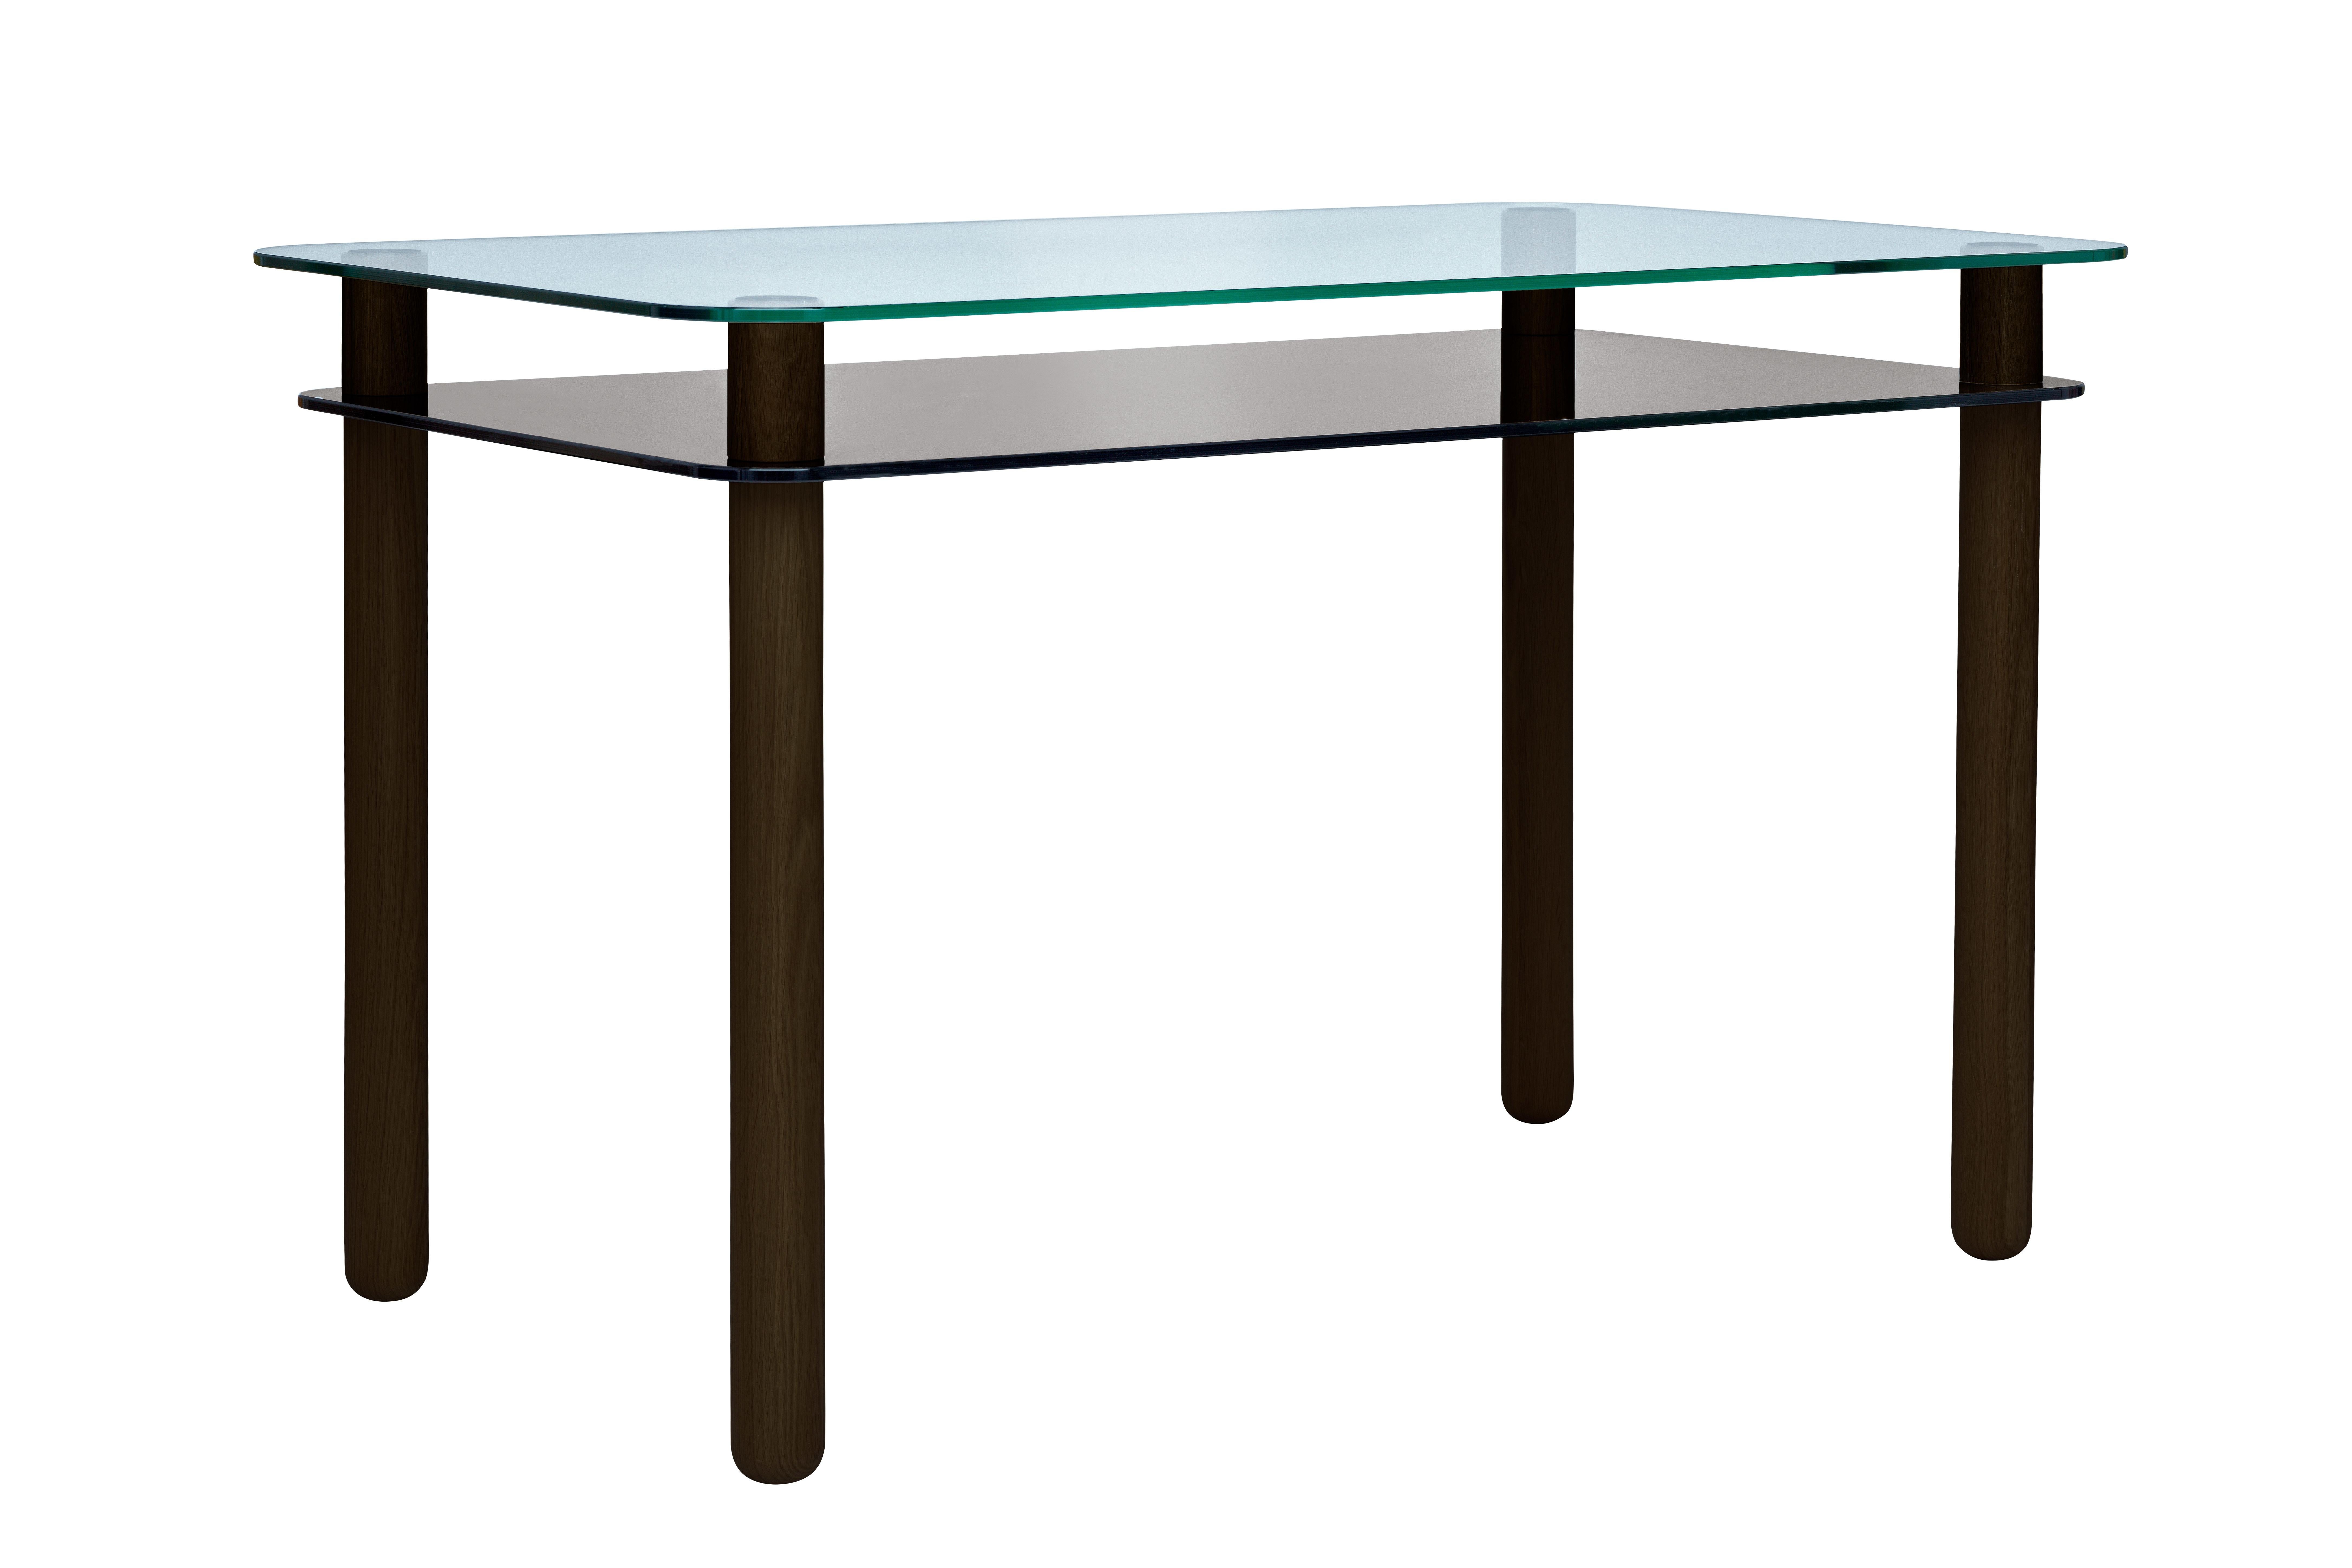 Polish Big Sur Desk by Fogia, Clear & Anthracite Glass , Wenge Legs For Sale